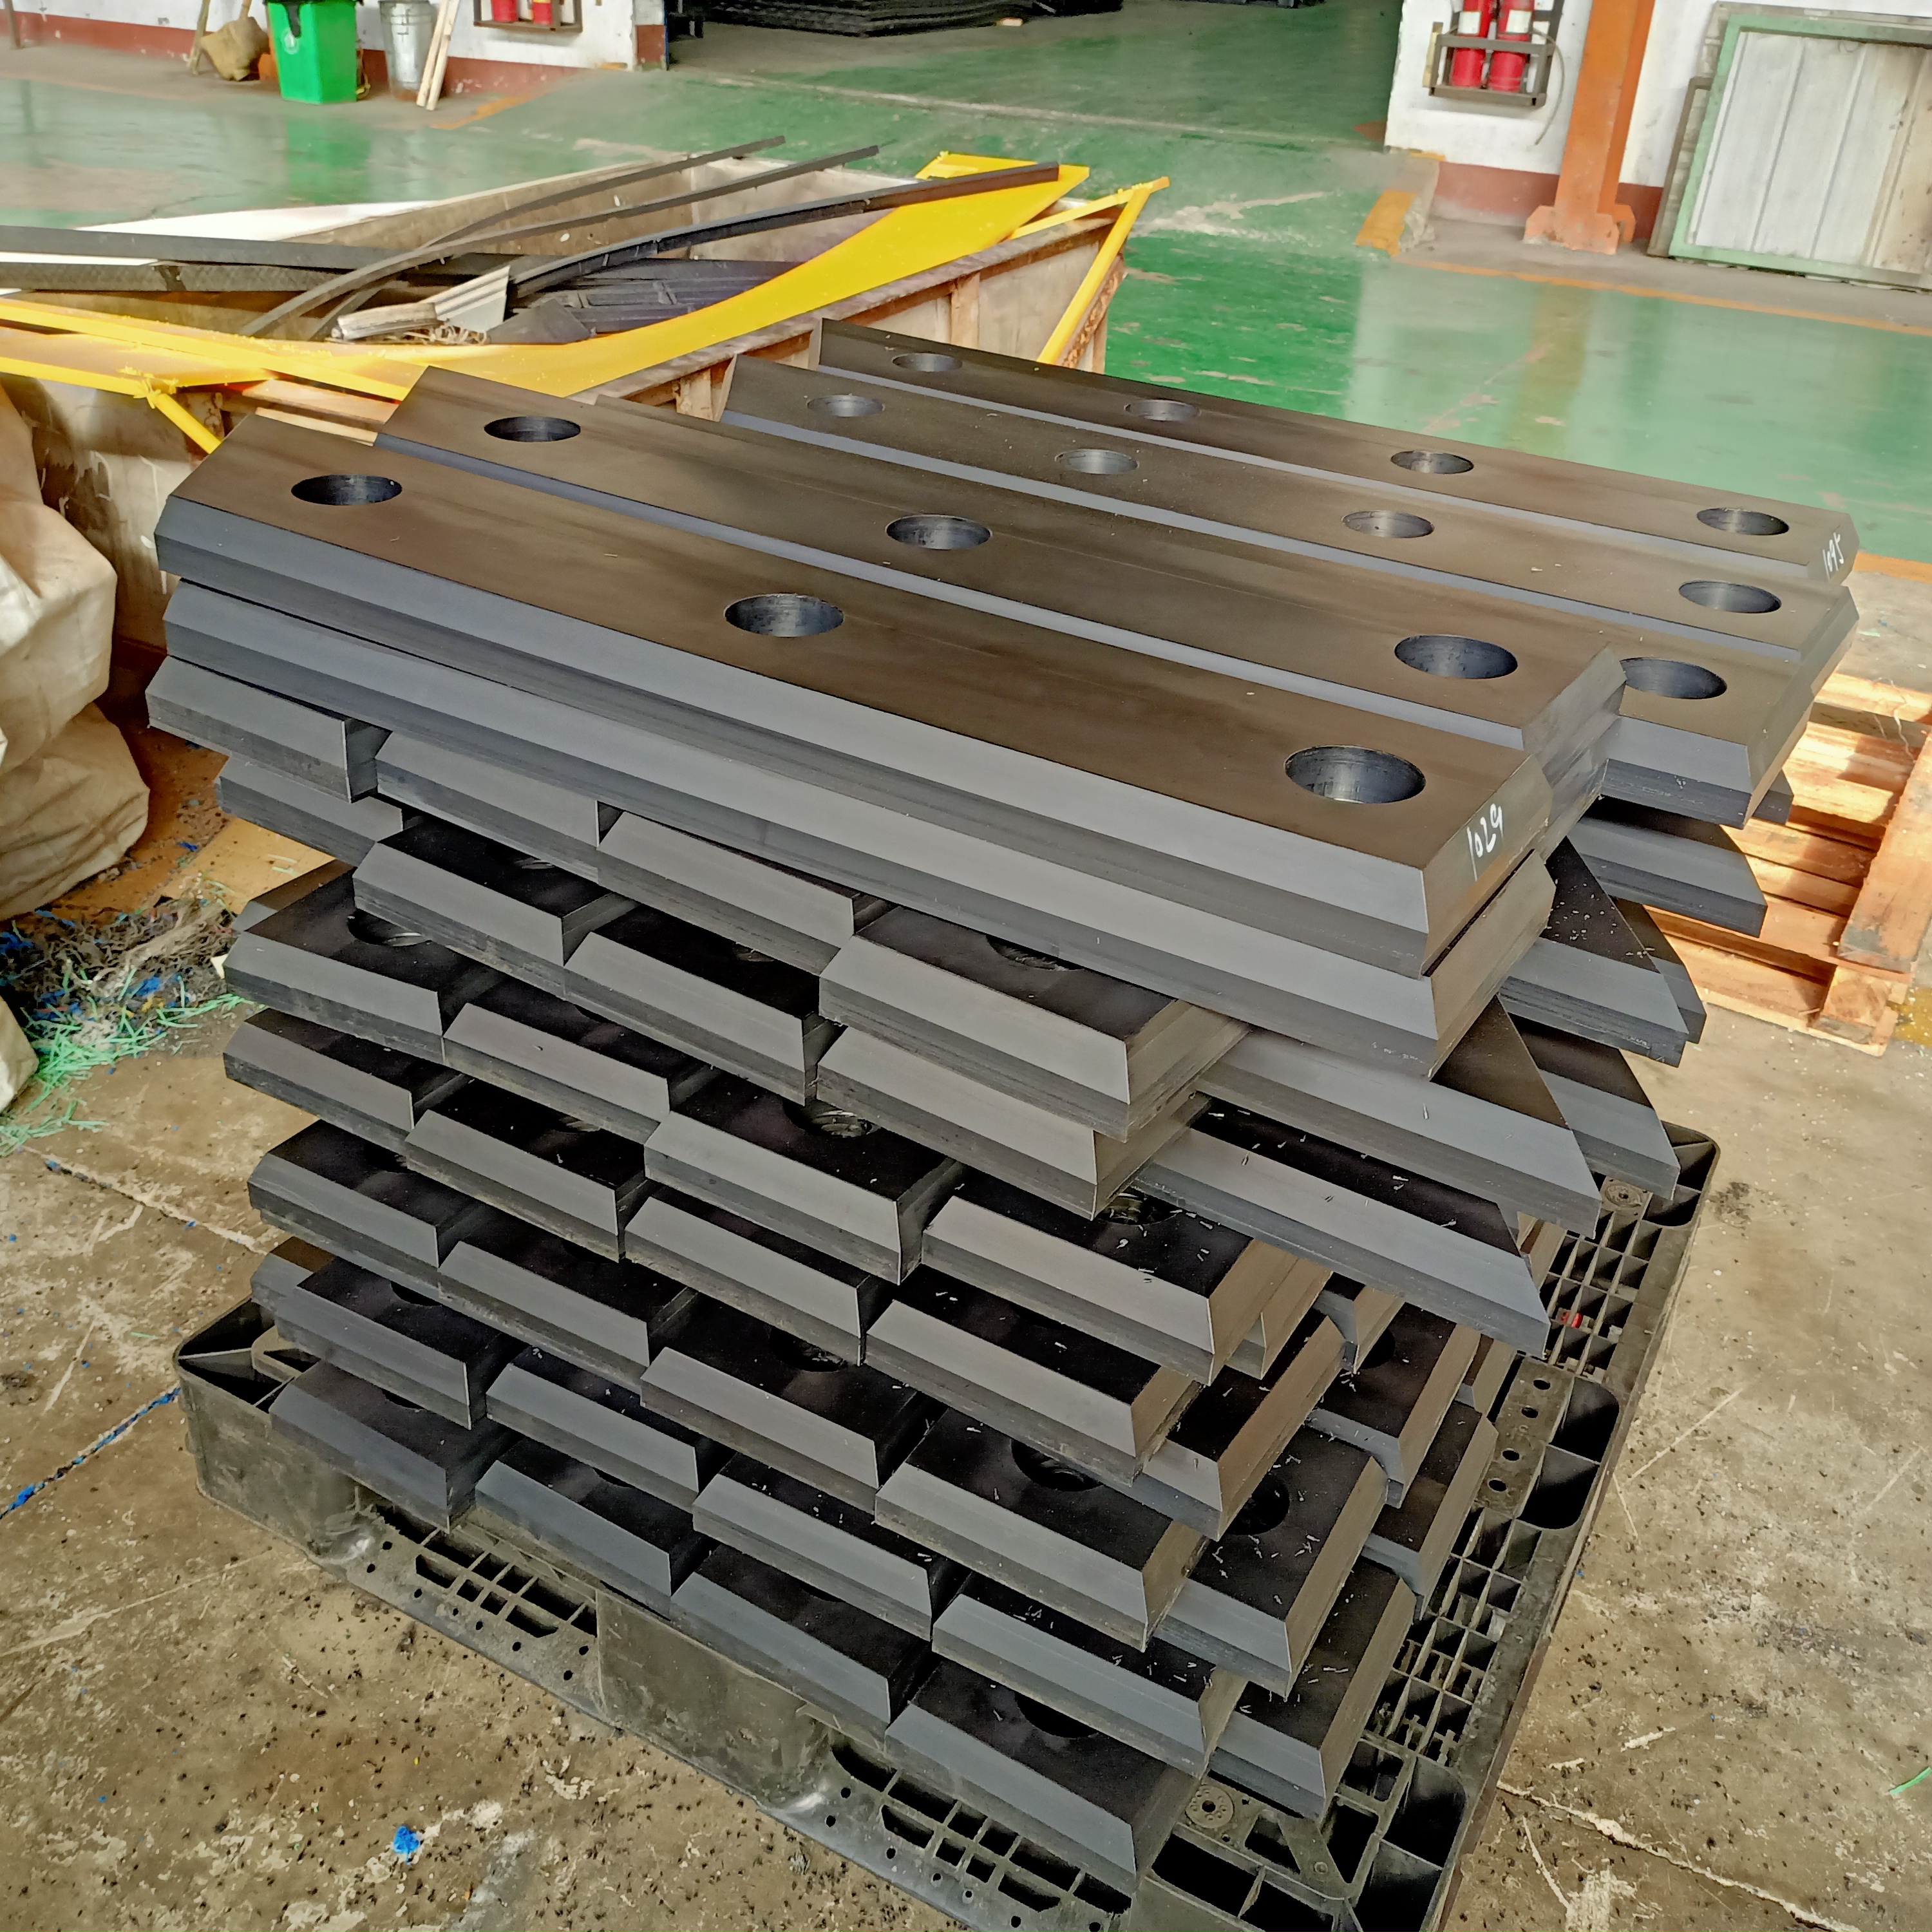 Light Weight Plastic UHMWPE Track Pads For Amphibious Excavator Wear Resistant Roadliner Track Shoes